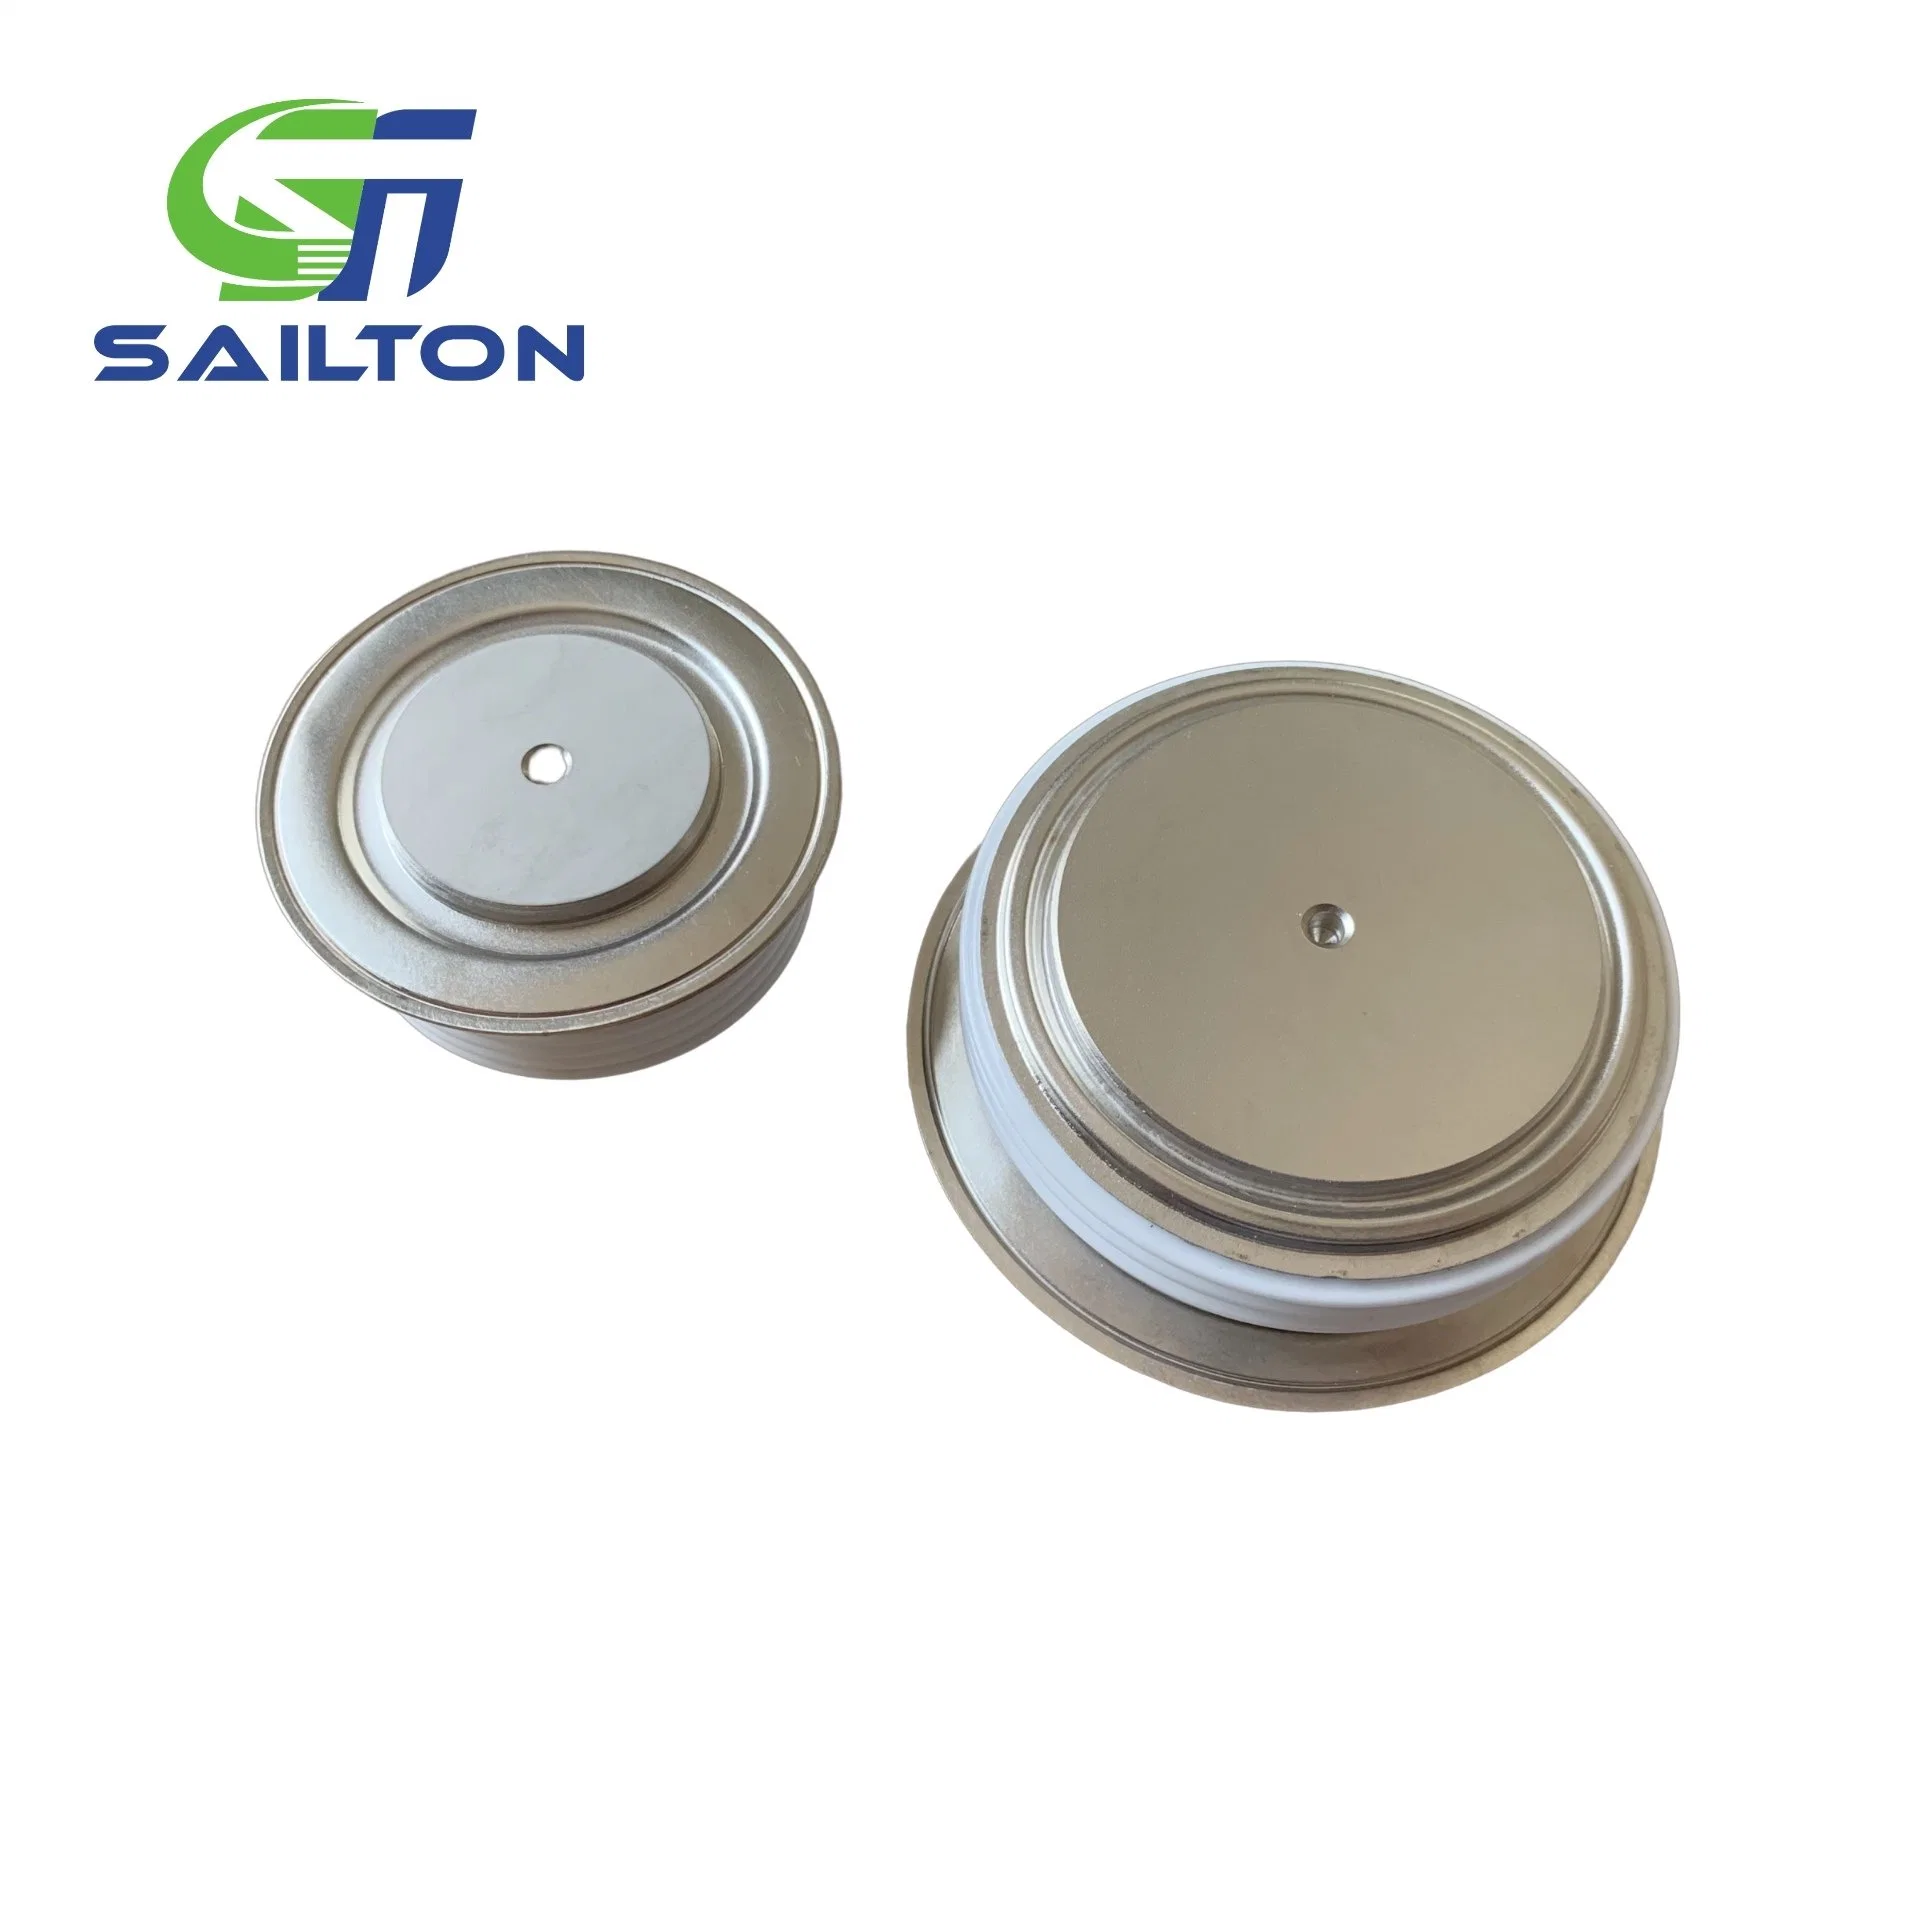 Fast Recovery Diodes Sailton Brand Semiconductor Zk800A/4500V